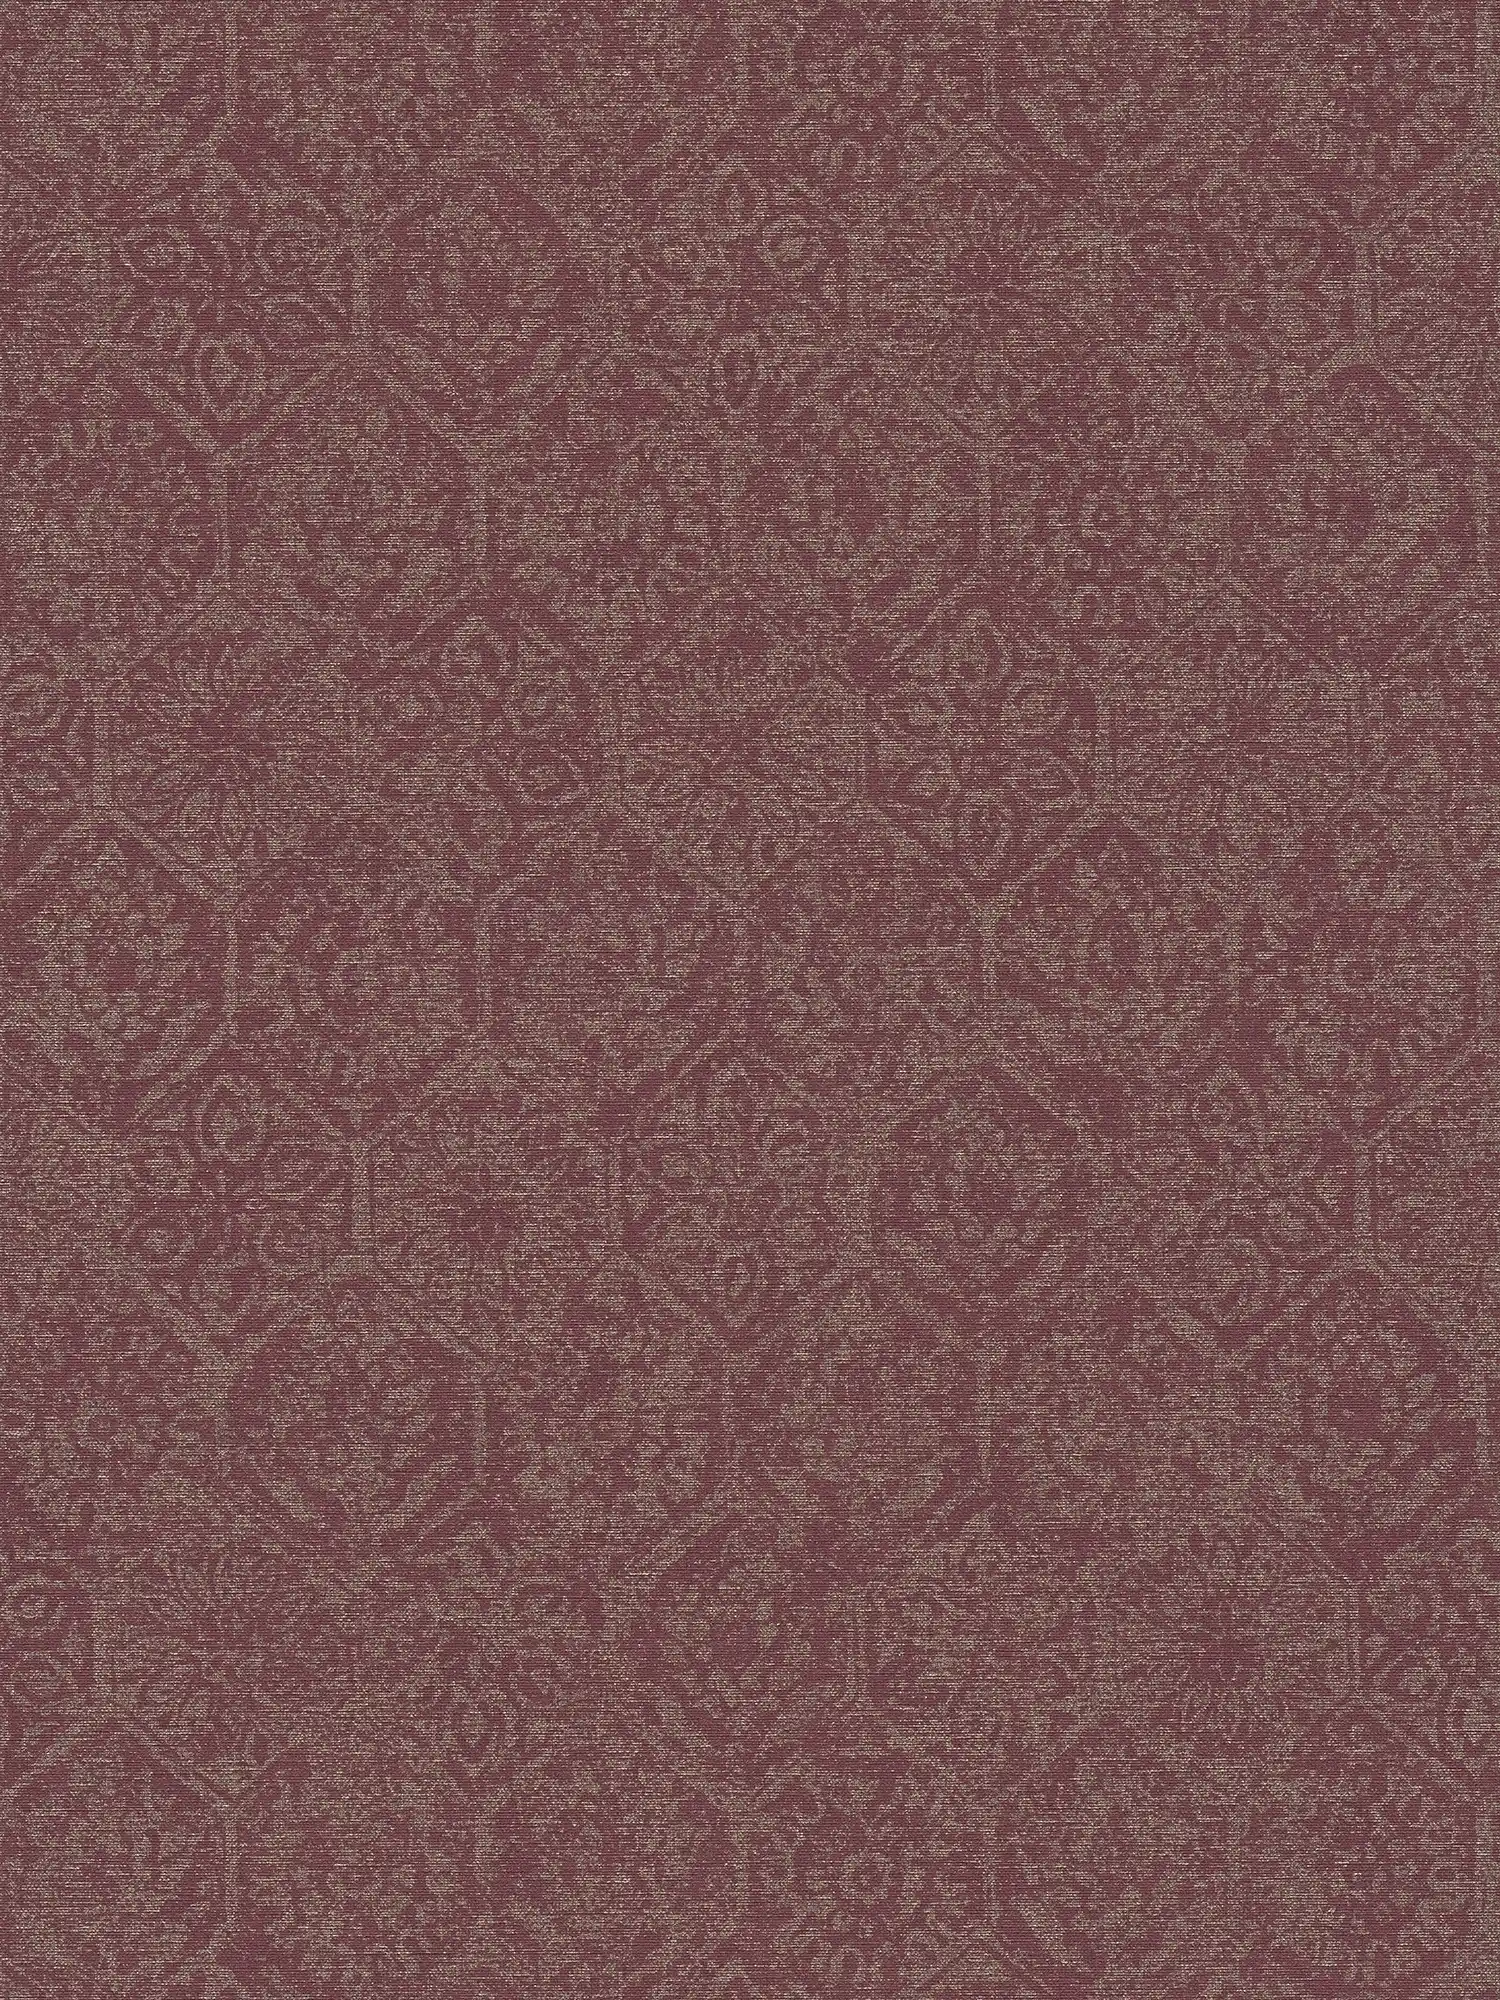 Wallpaper gold pattern in used look with linen look - metallic, red
